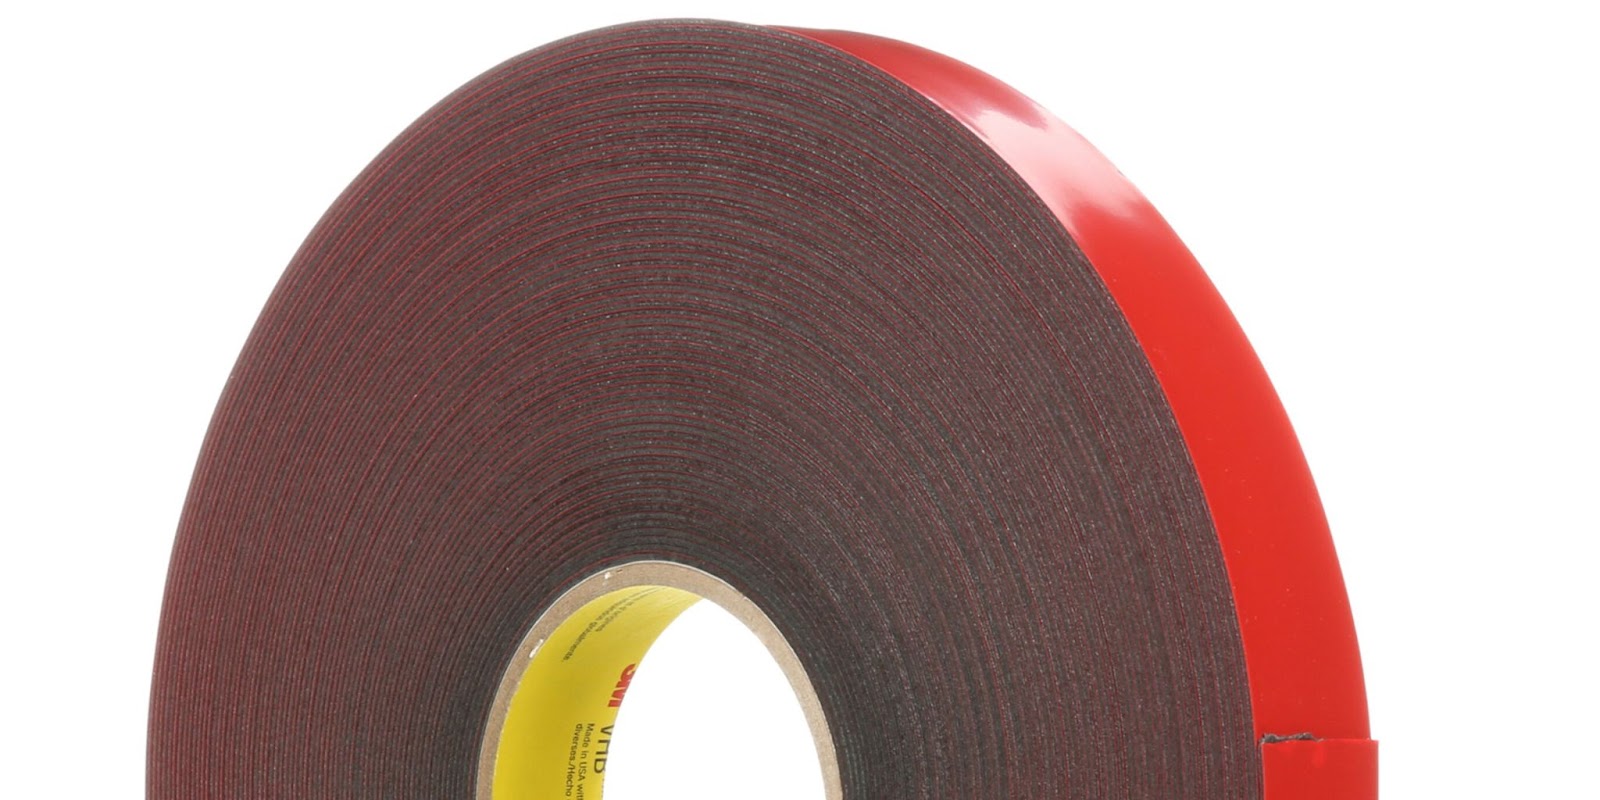 3M Super Strong Double Sided Tape / Bike Bicycle Car Vehicle Tape /  Waterproof/ Outdoor/ Heavy Duty / Self Adhesive Foam Tape